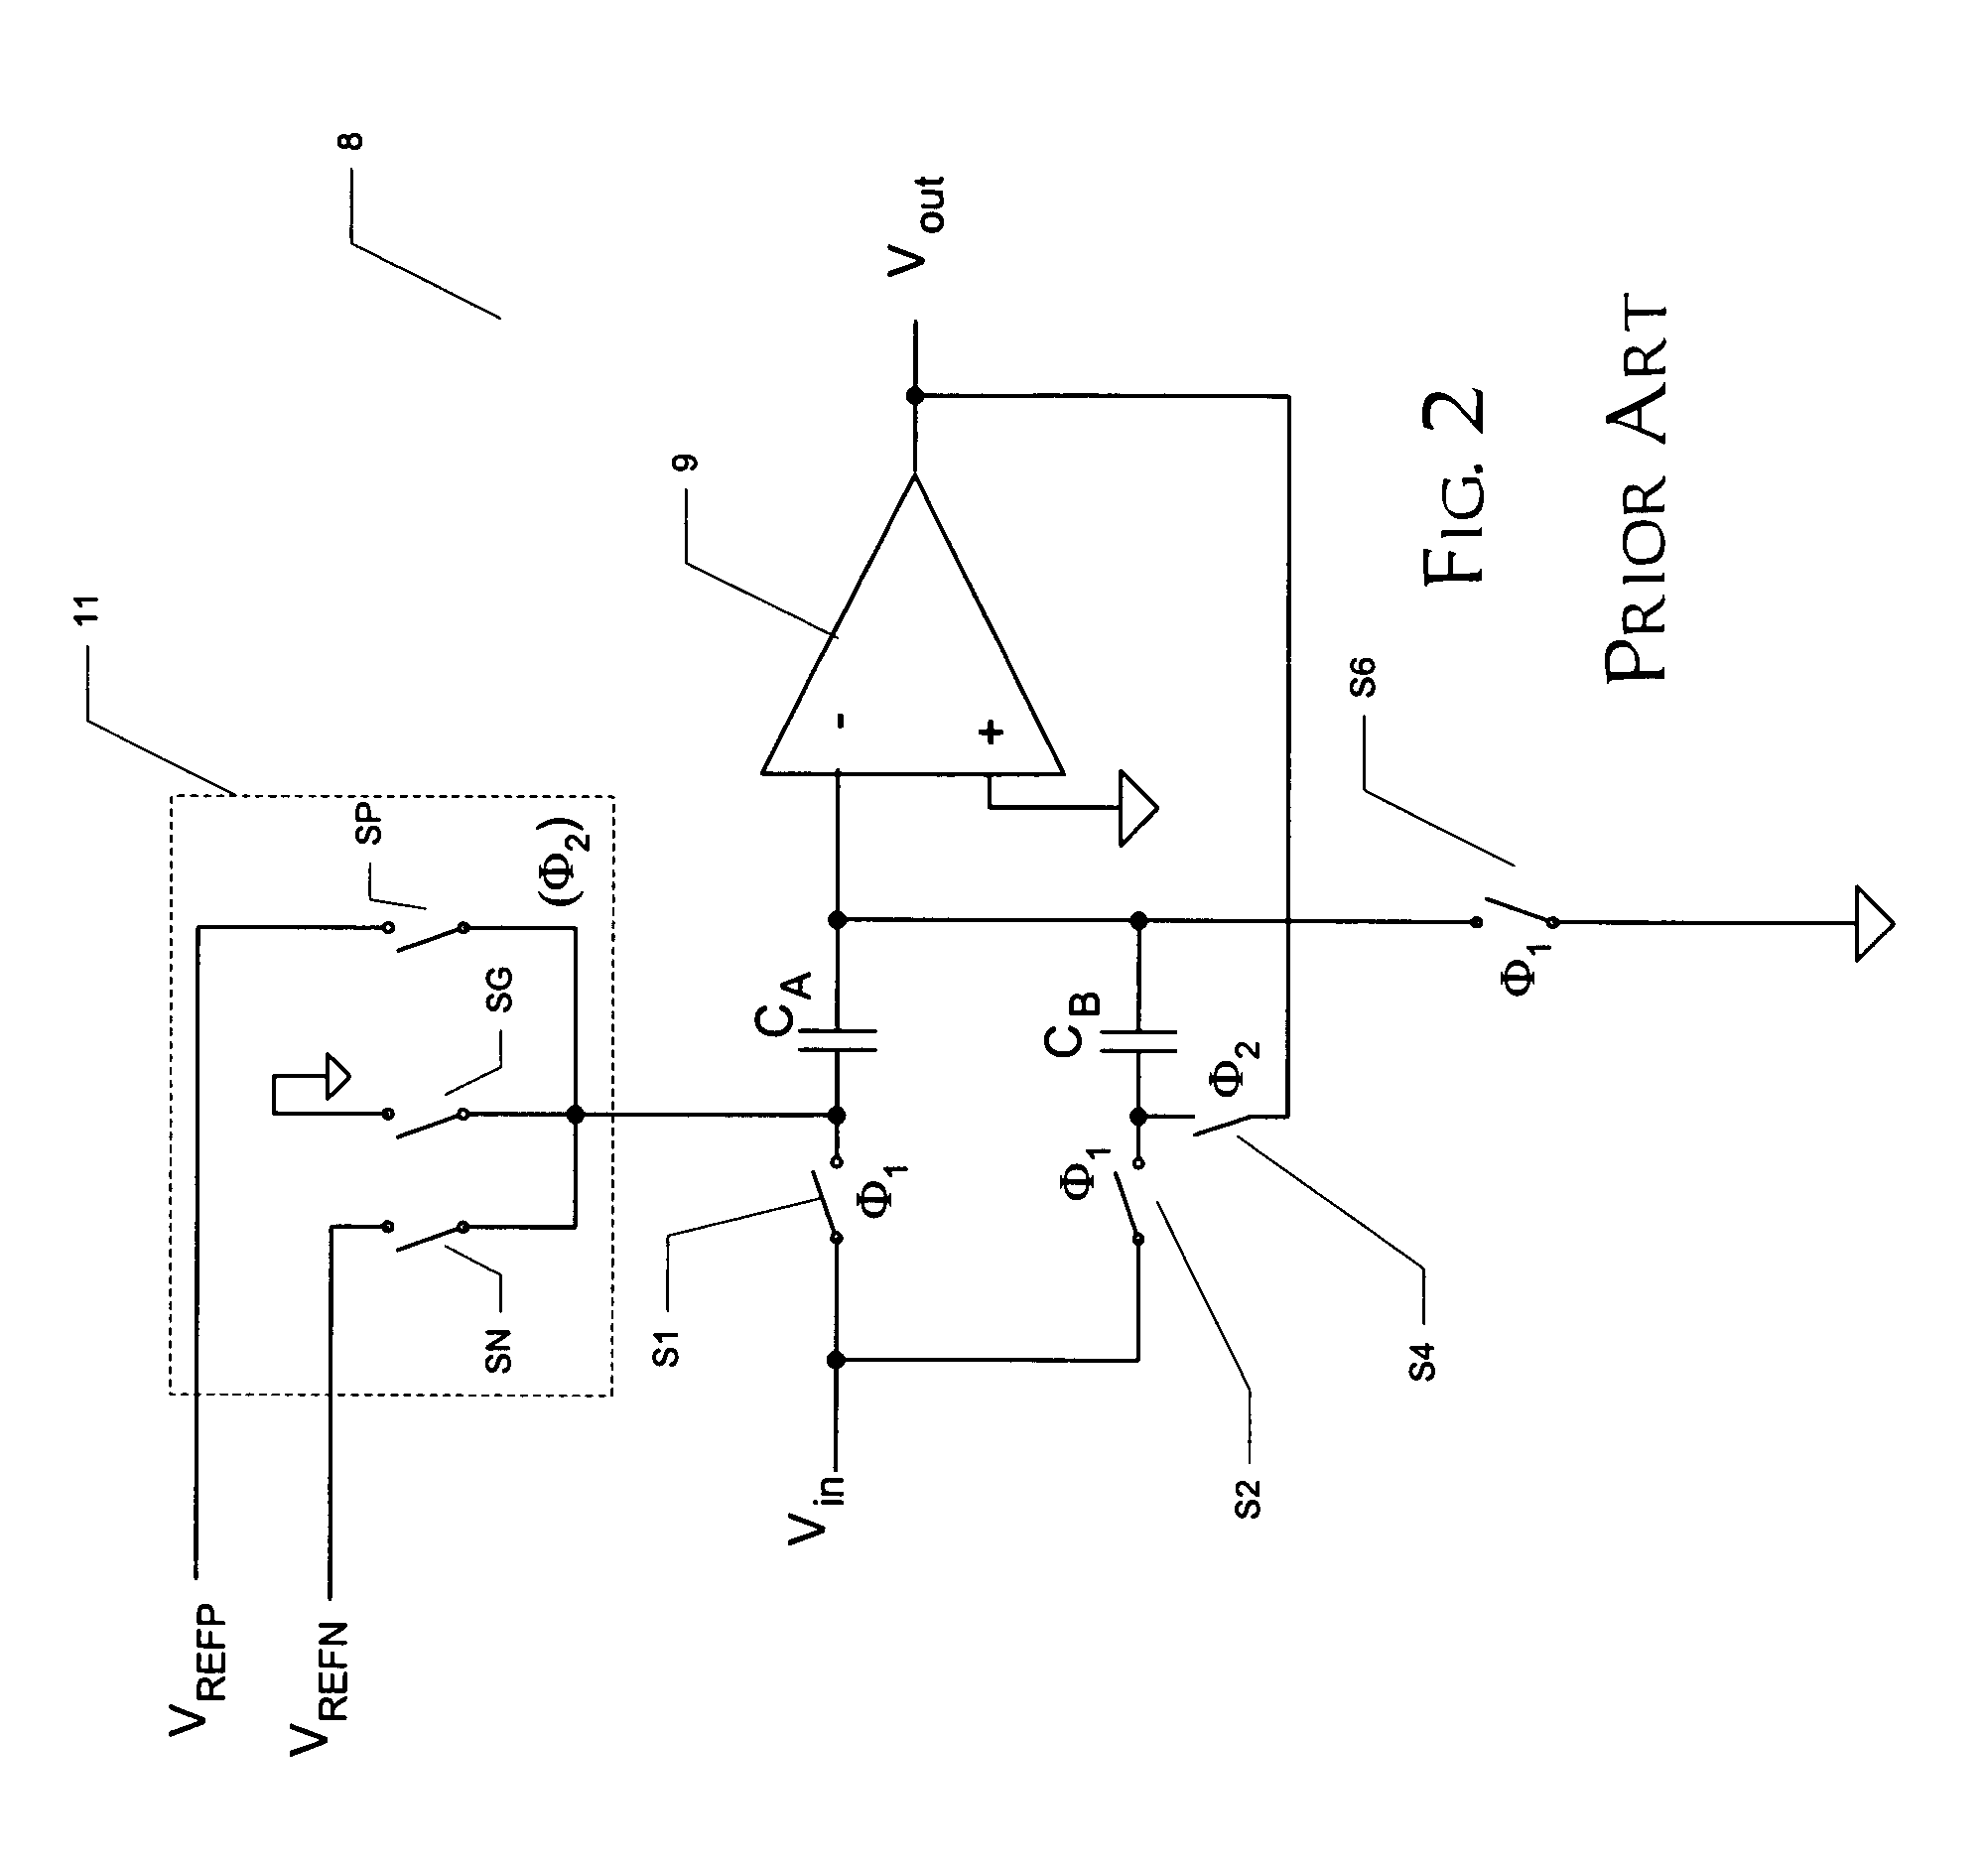 Switched-capacitor circuit with scaled reference voltage